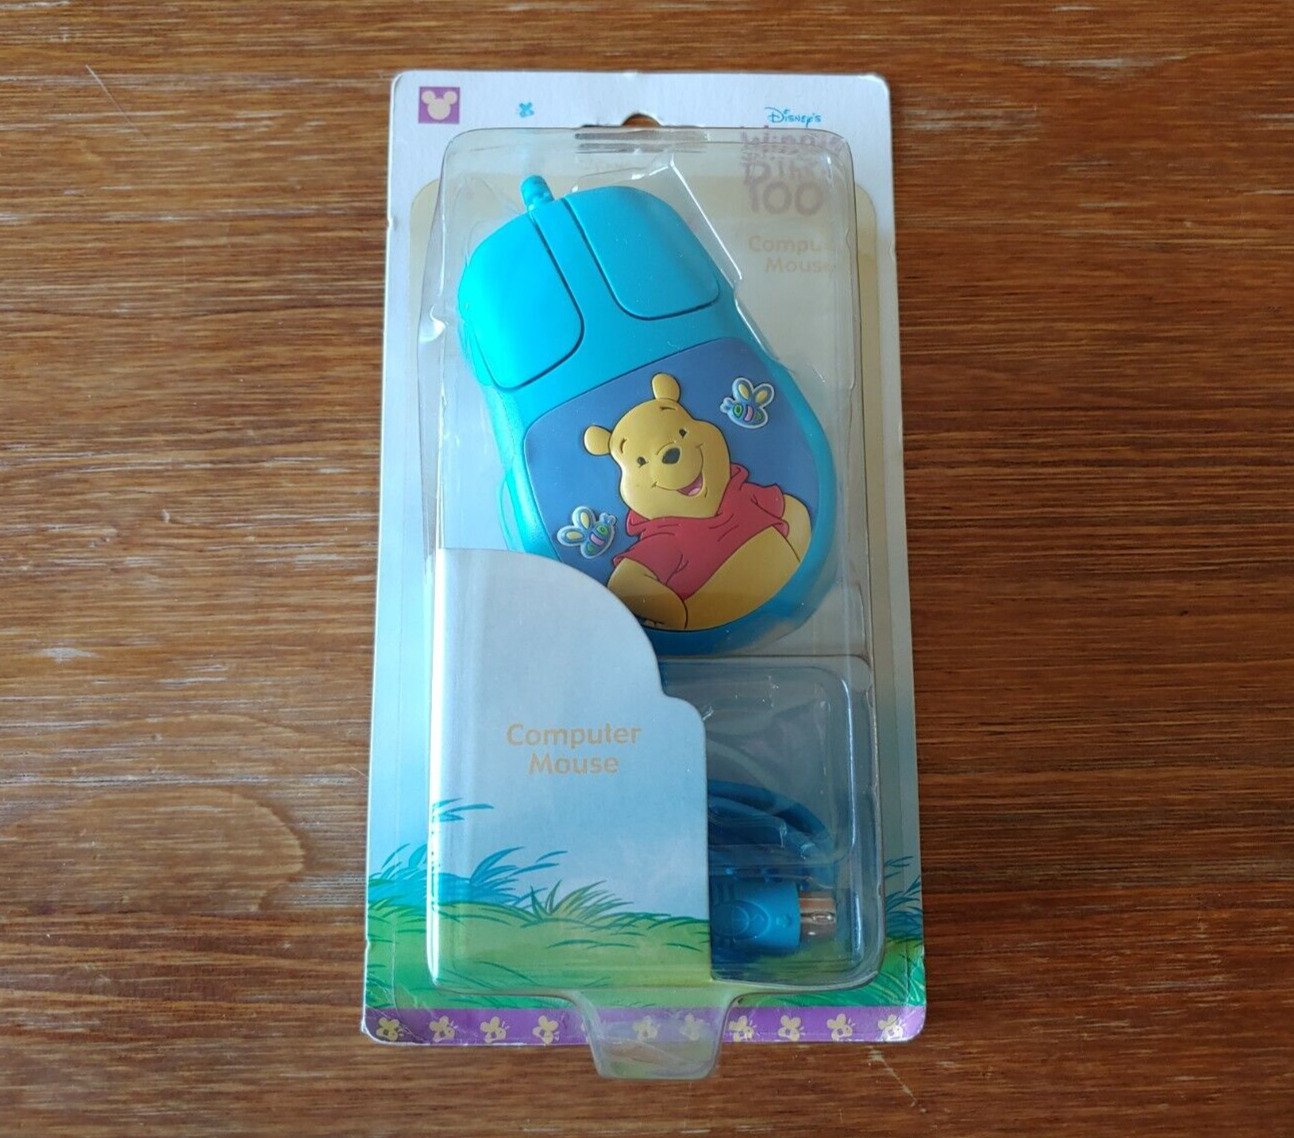 Disney\'s Winnie The Pooh Computer Mouse - Vintage Collectable And RARE - Sealed